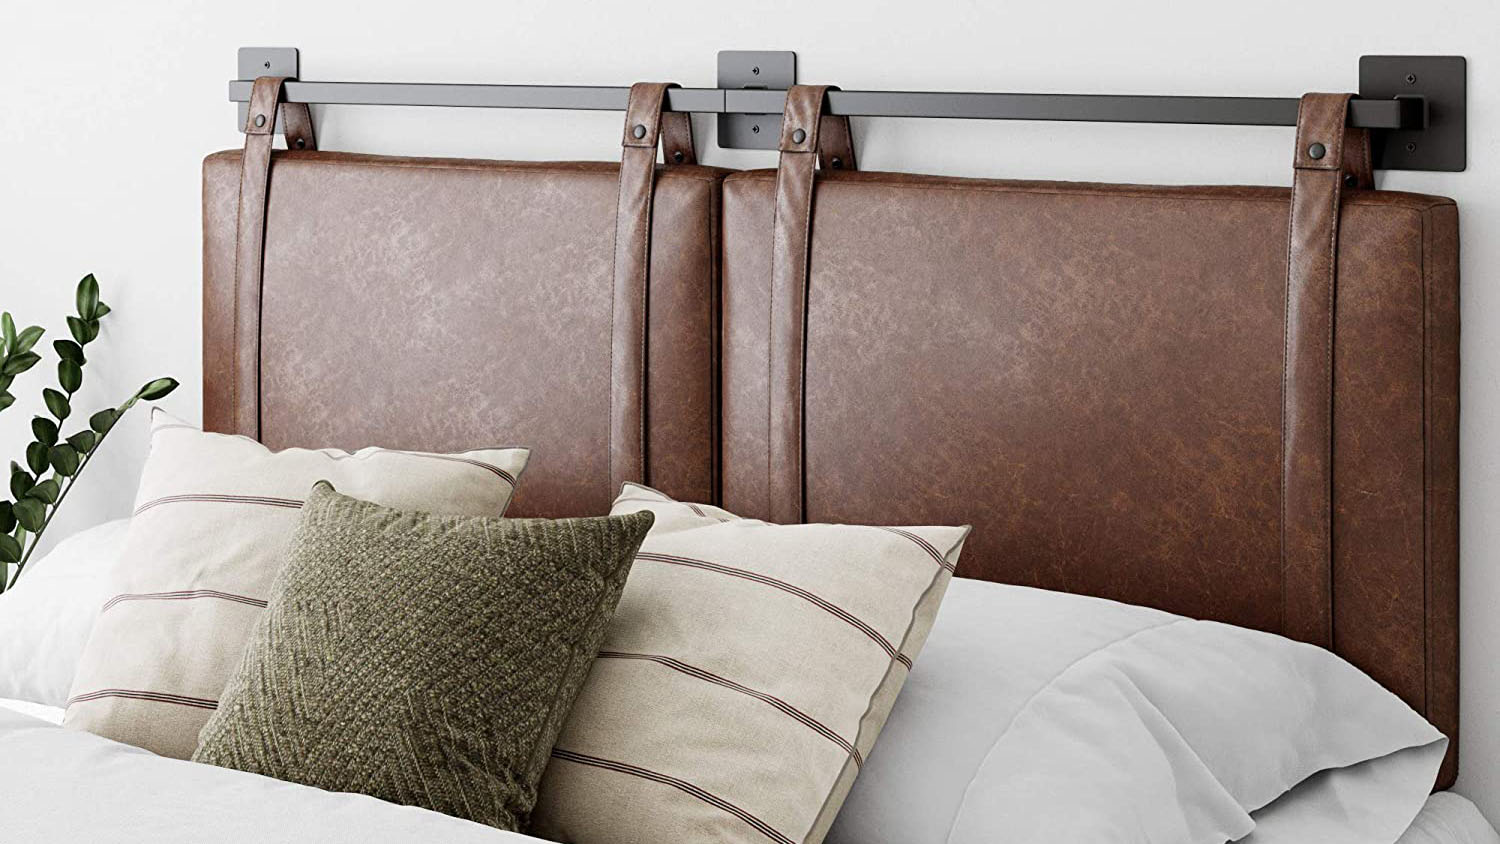 15 Best Headboards For Adjustable Beds, Can You Use A Headboard With An Adjustable Base Bed